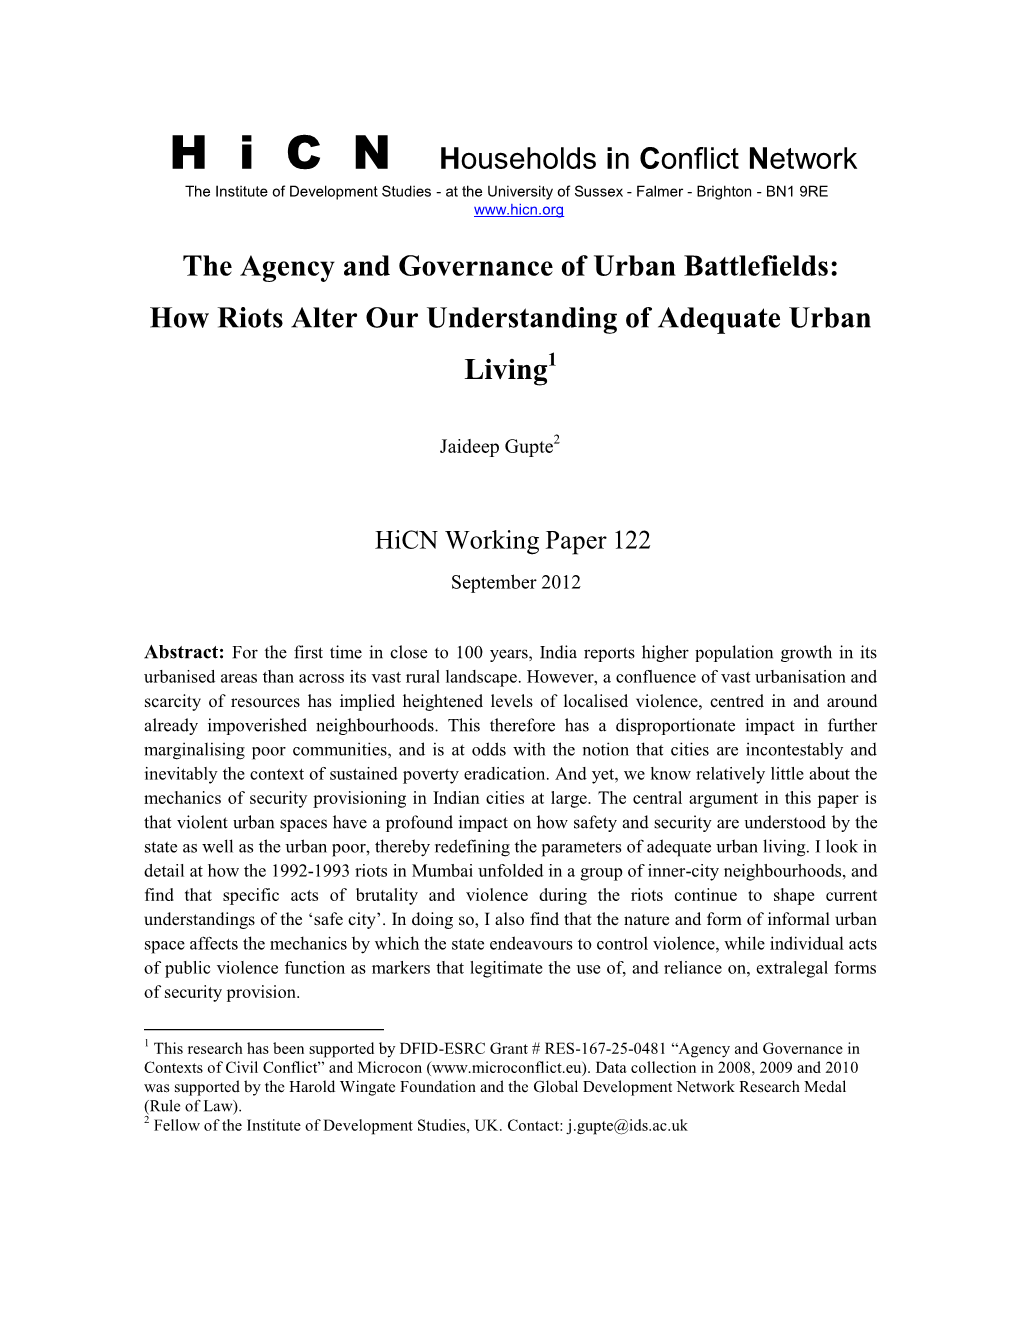 H I C N Households in Conflict Network the Agency and Governance of Urban Battlefields: How Riots Alter Our Understanding Of